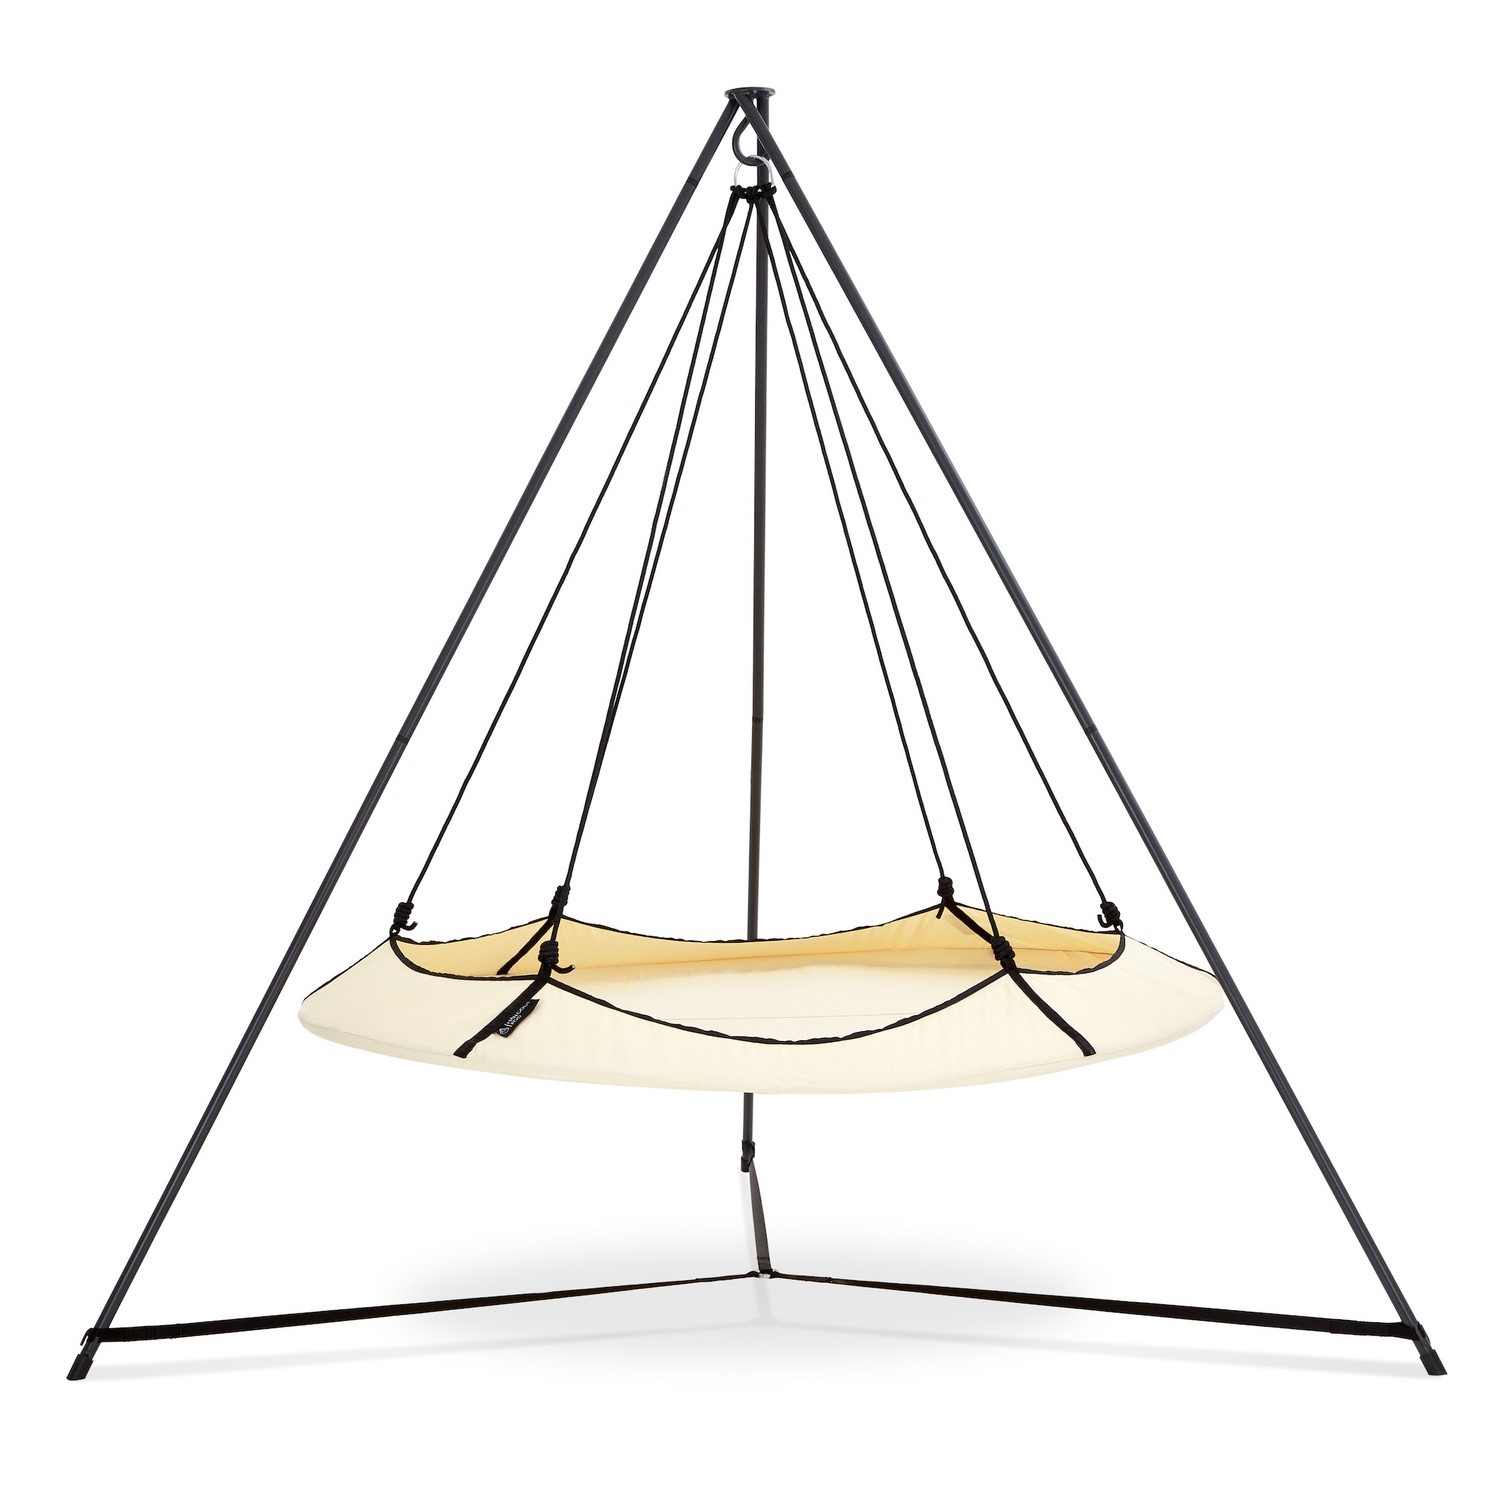 Photo of Hangout pod cream & black circular hammock bed with stand